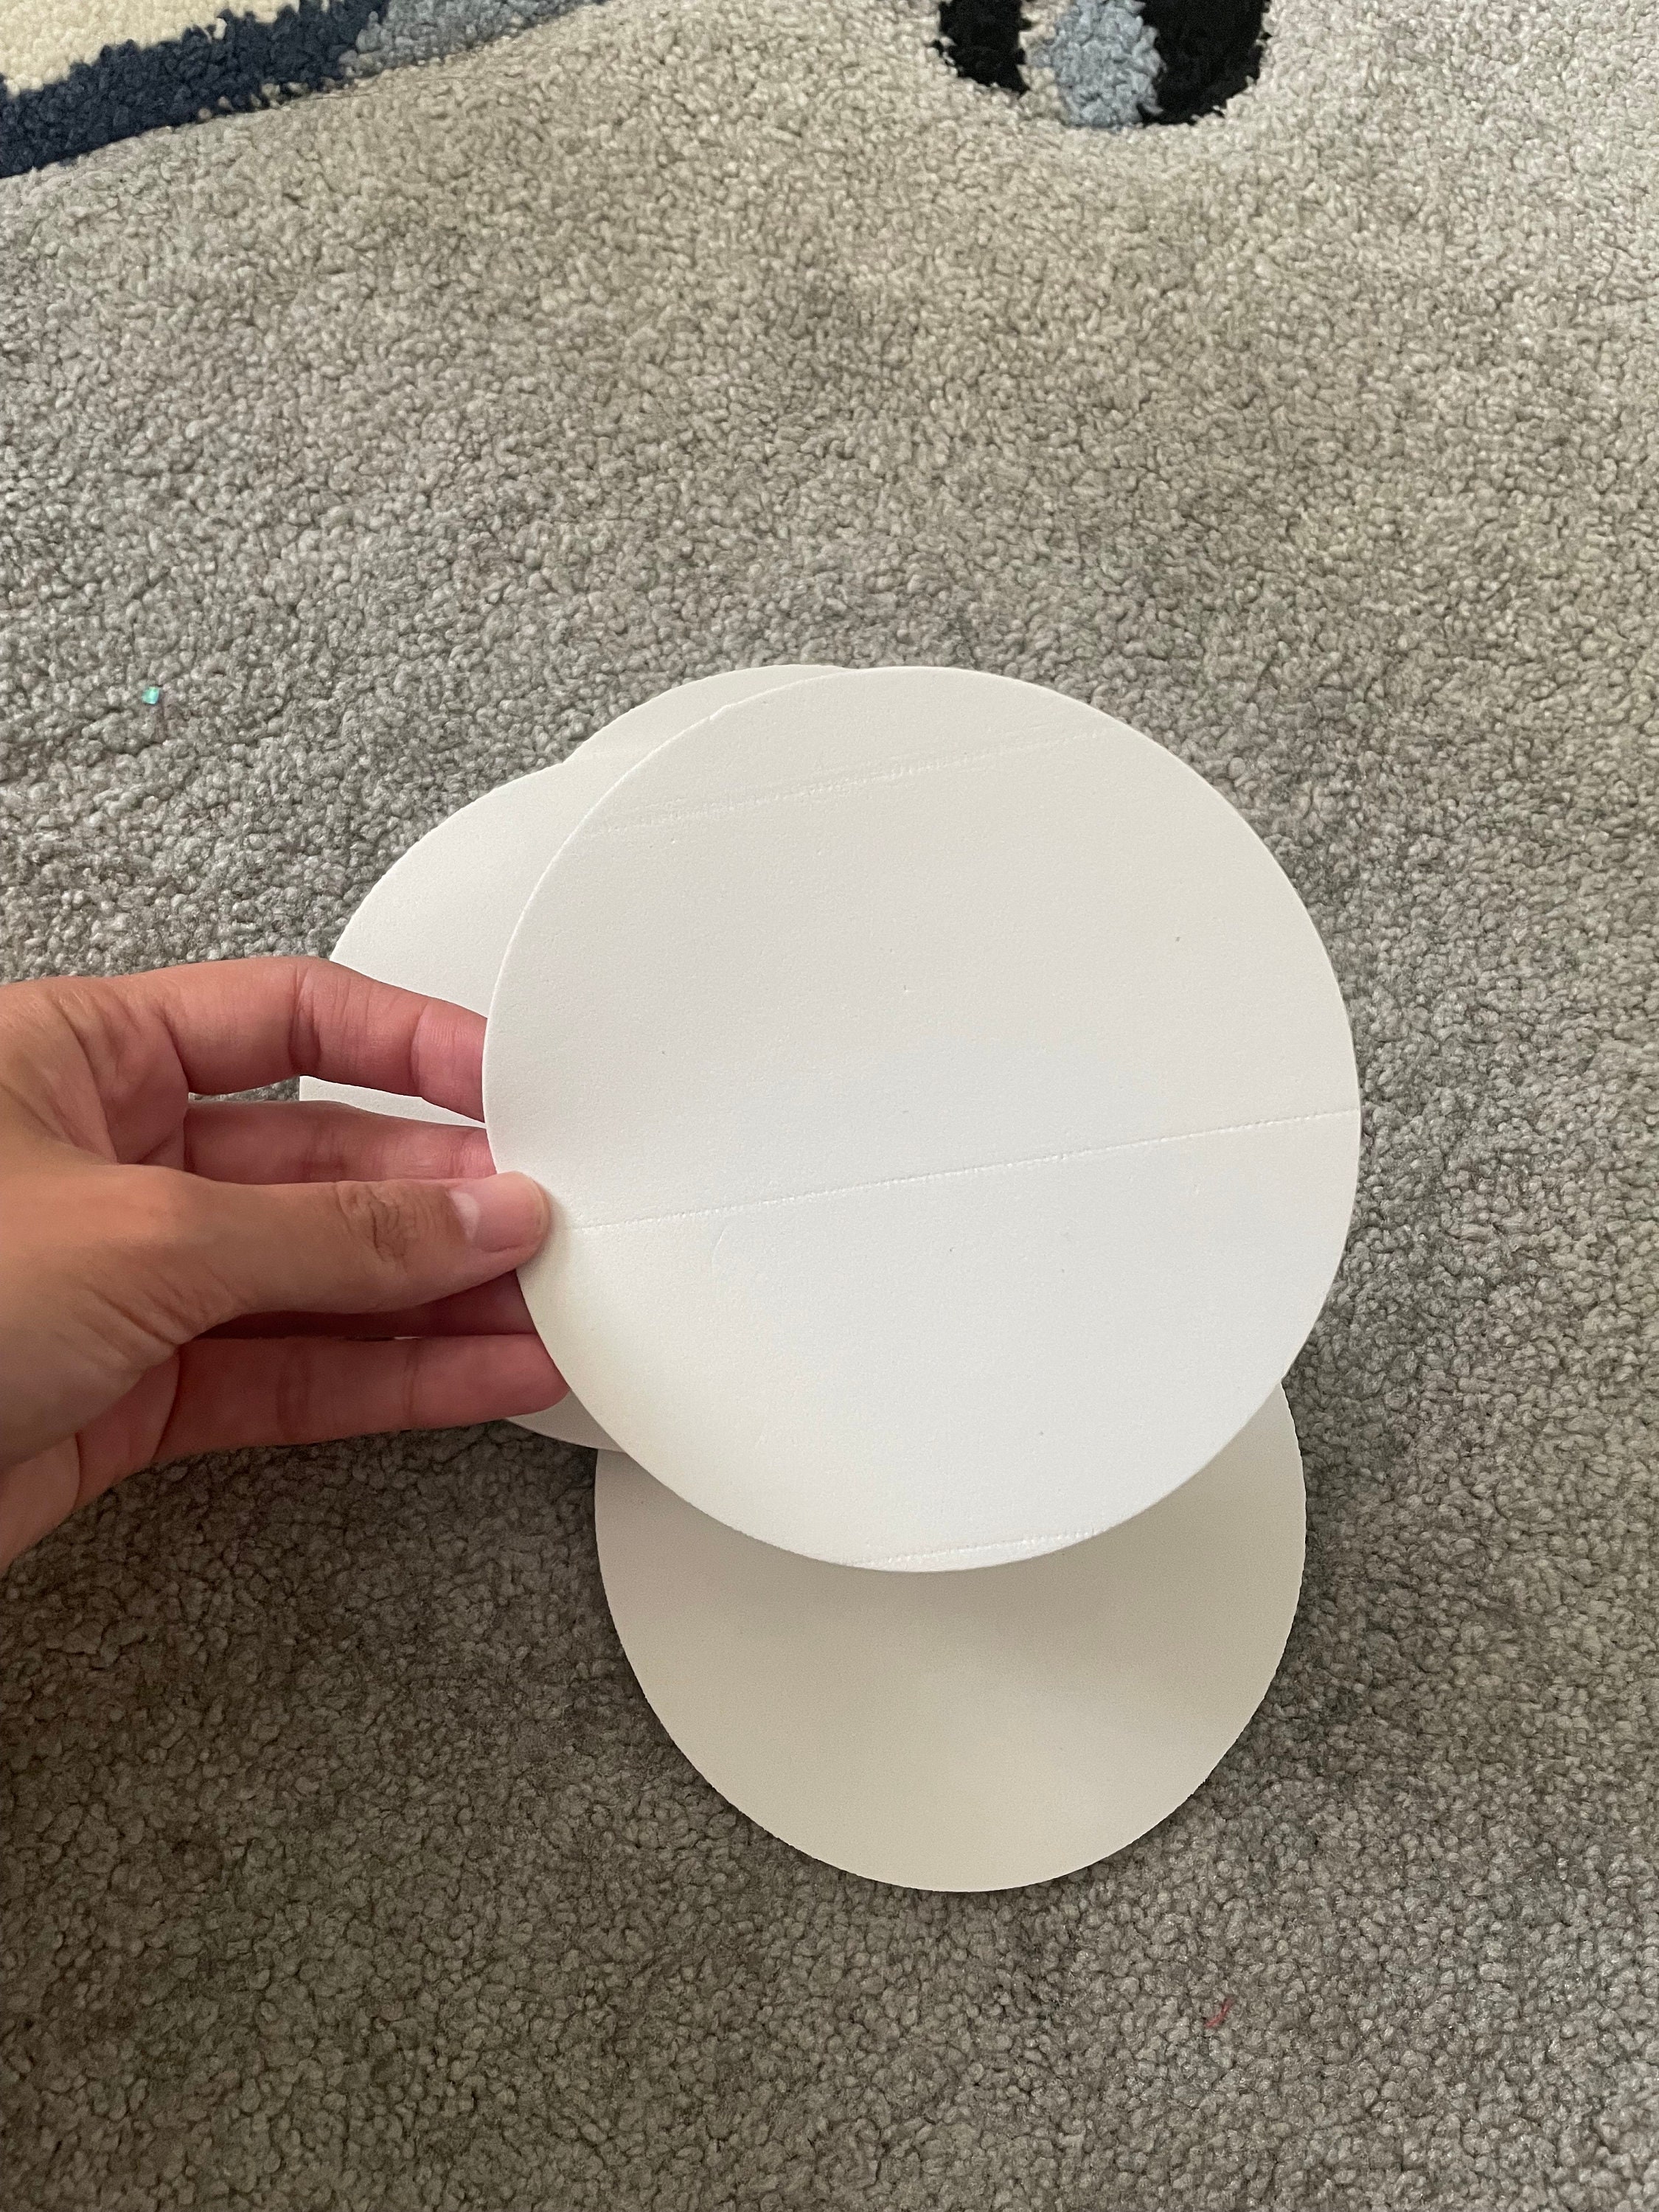 Uxcell Foam Circles for Crafts 11.81 x 11.81 x 0.79 Inch Polystyrene Round  Foam Disc for DIY Projects 